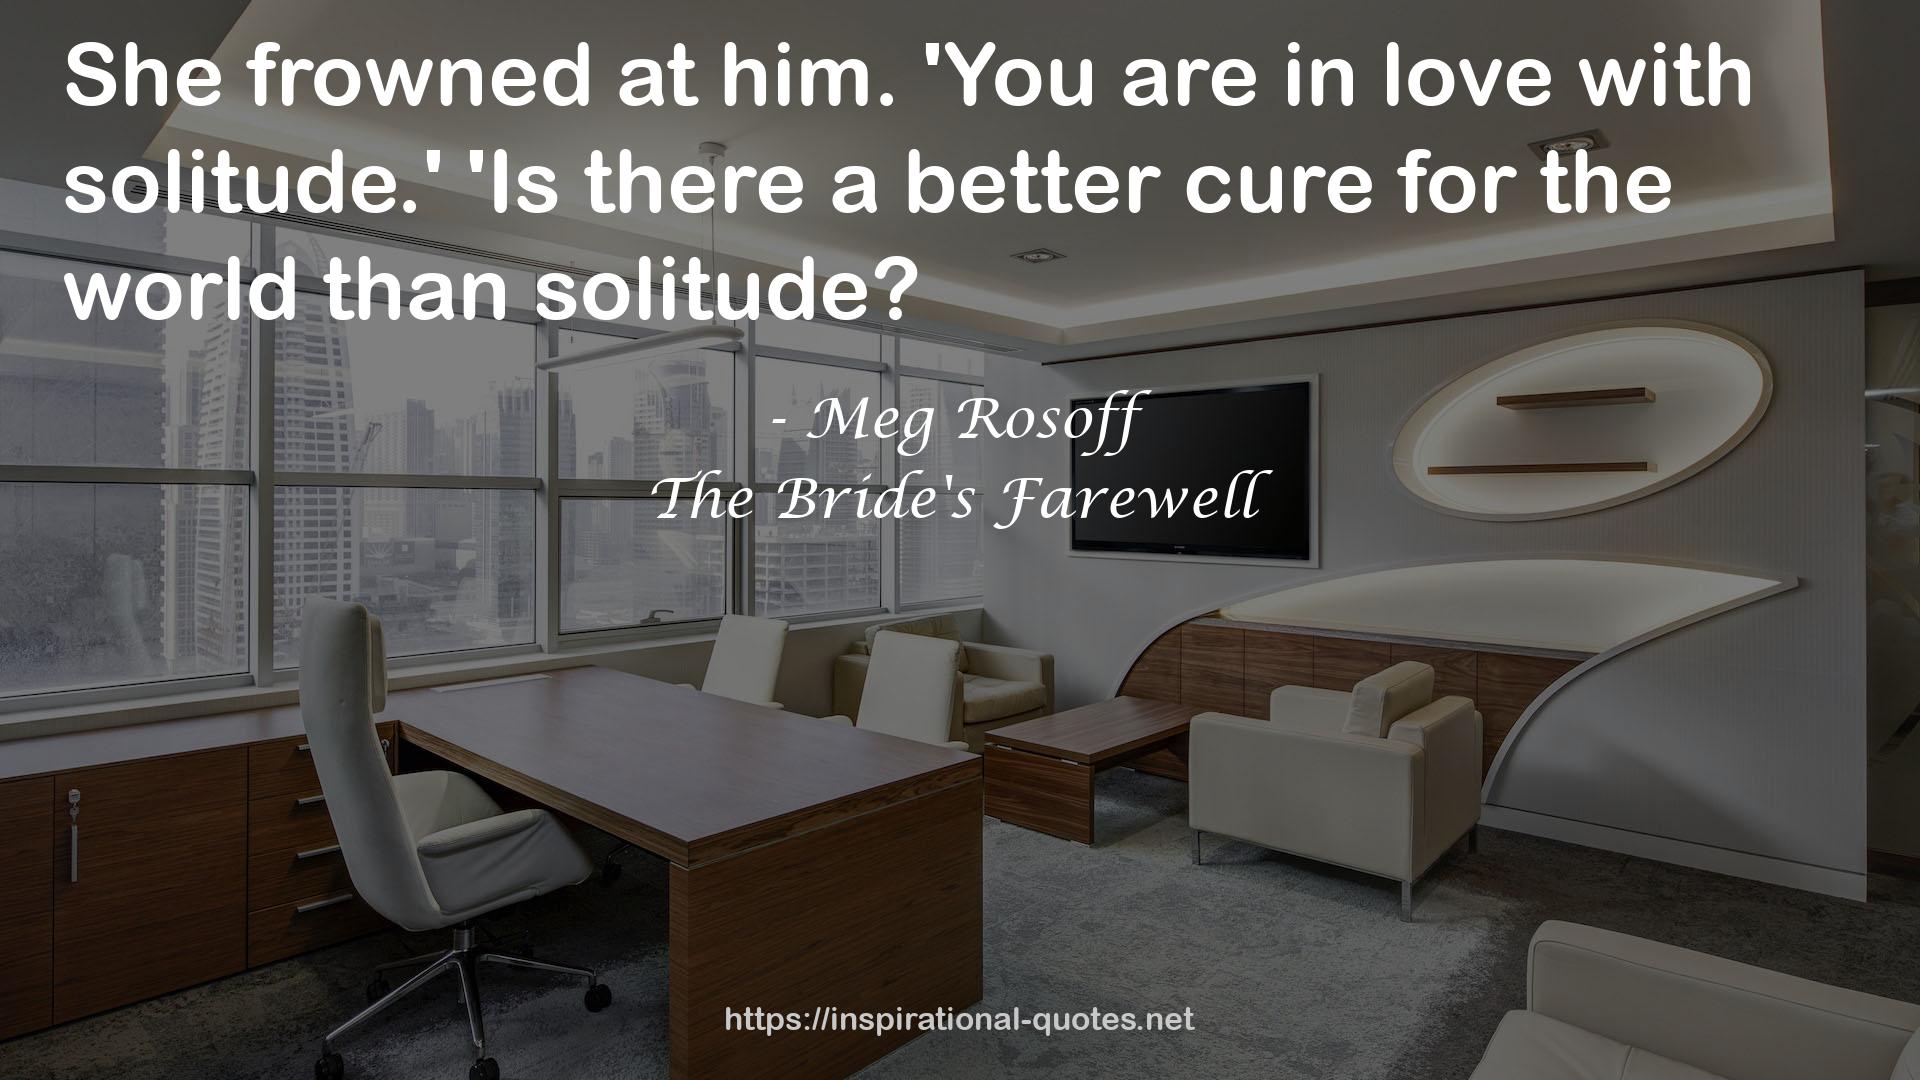 The Bride's Farewell QUOTES